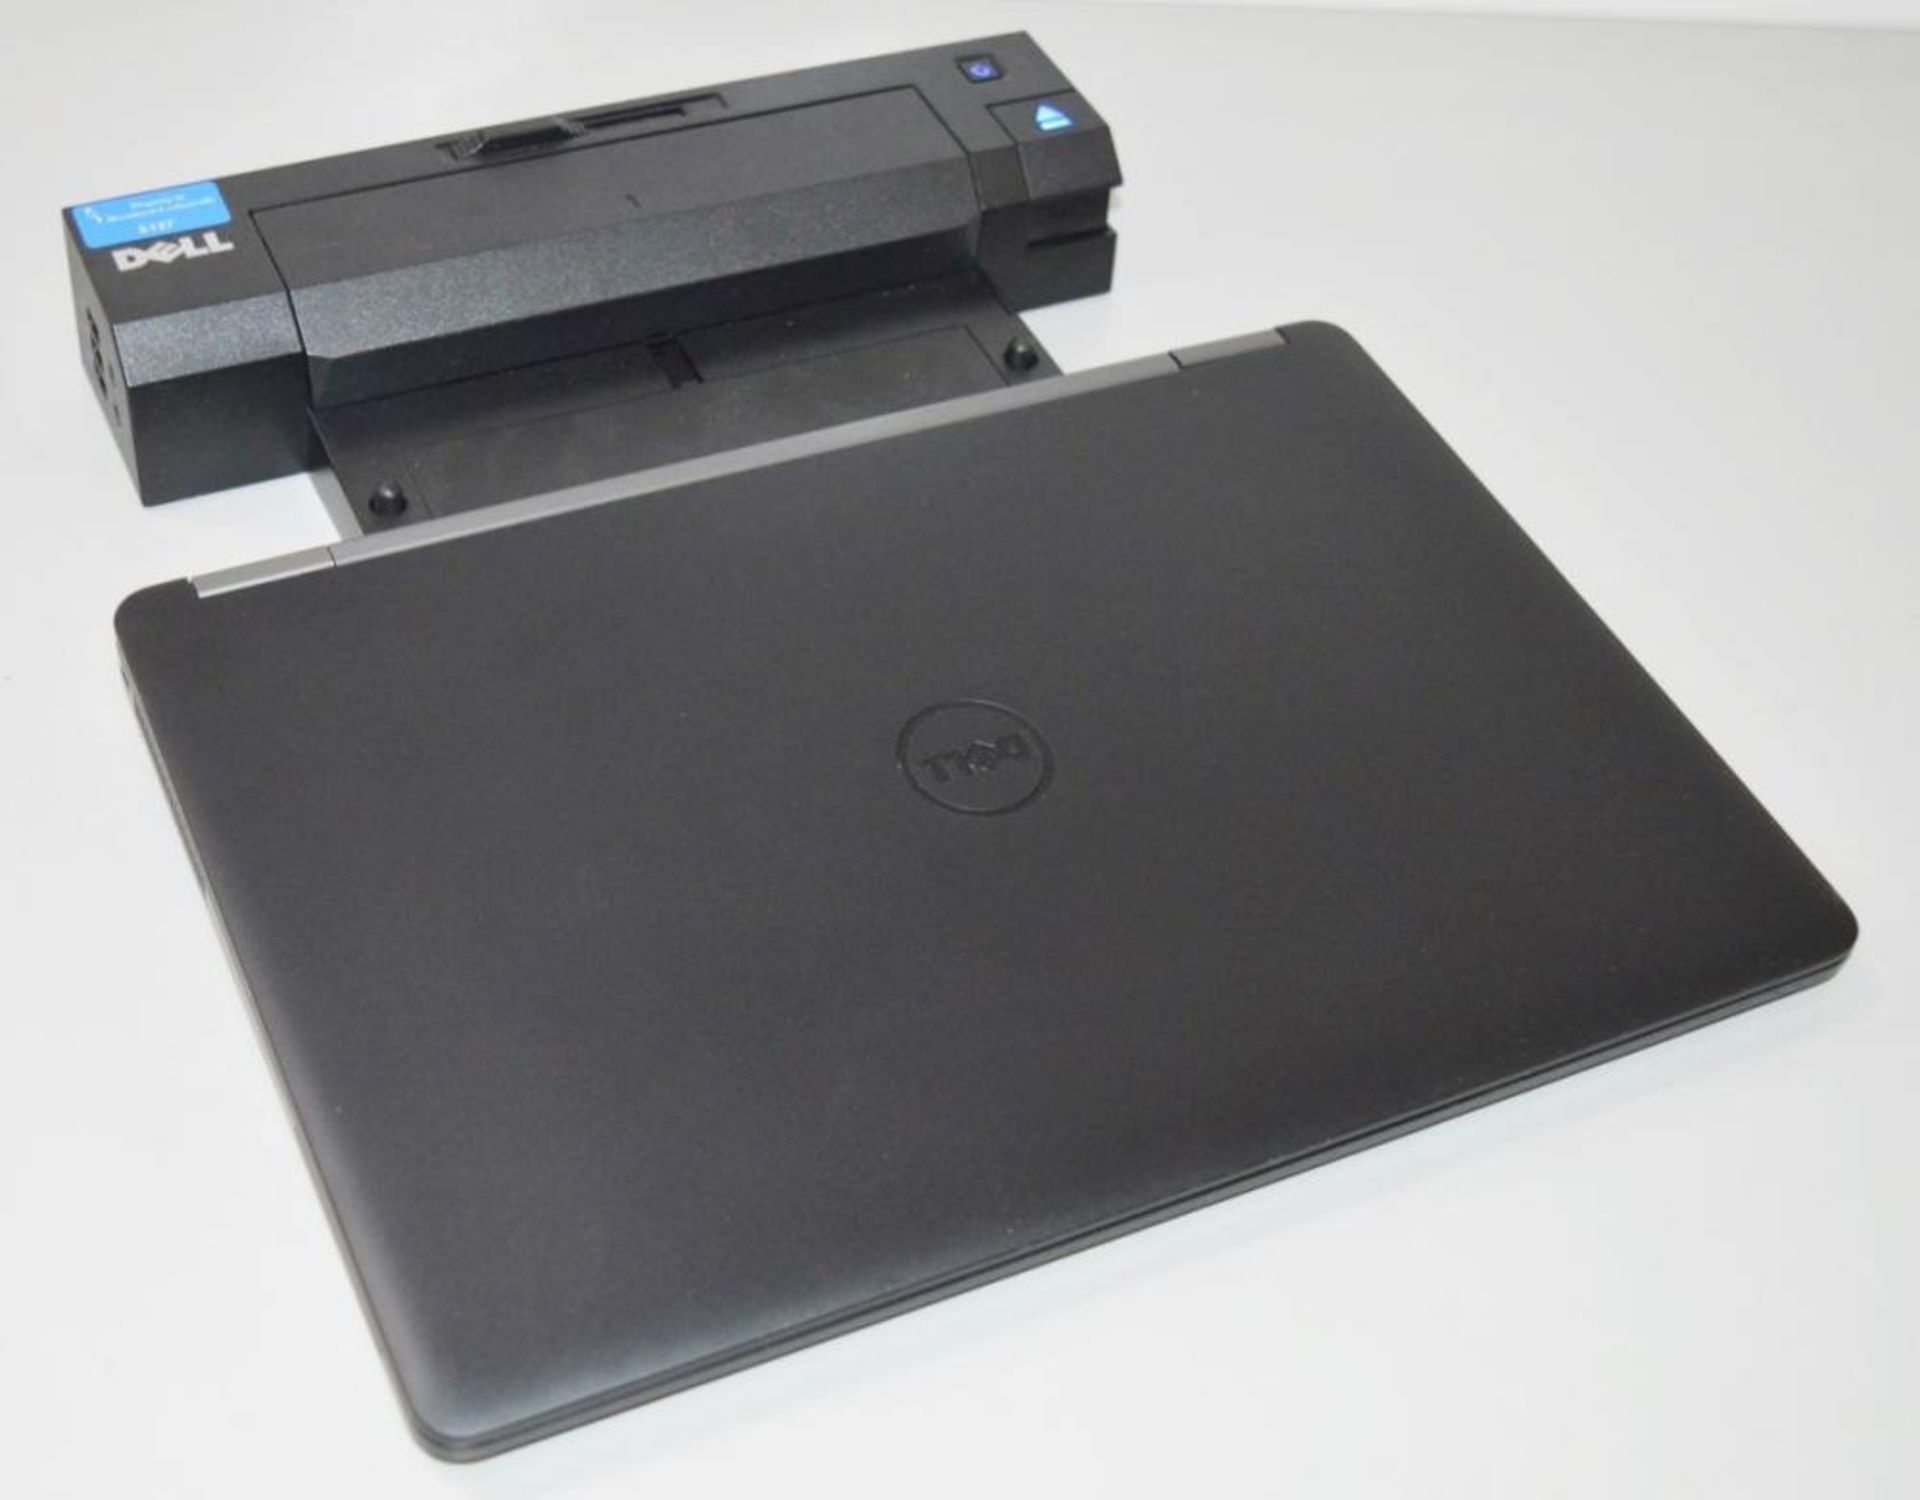 1 x Dell Latitude E7470 Laptop Computer - 14 Inch FHD Screen - Features Include a 6th Gen Core i7- - Image 4 of 10